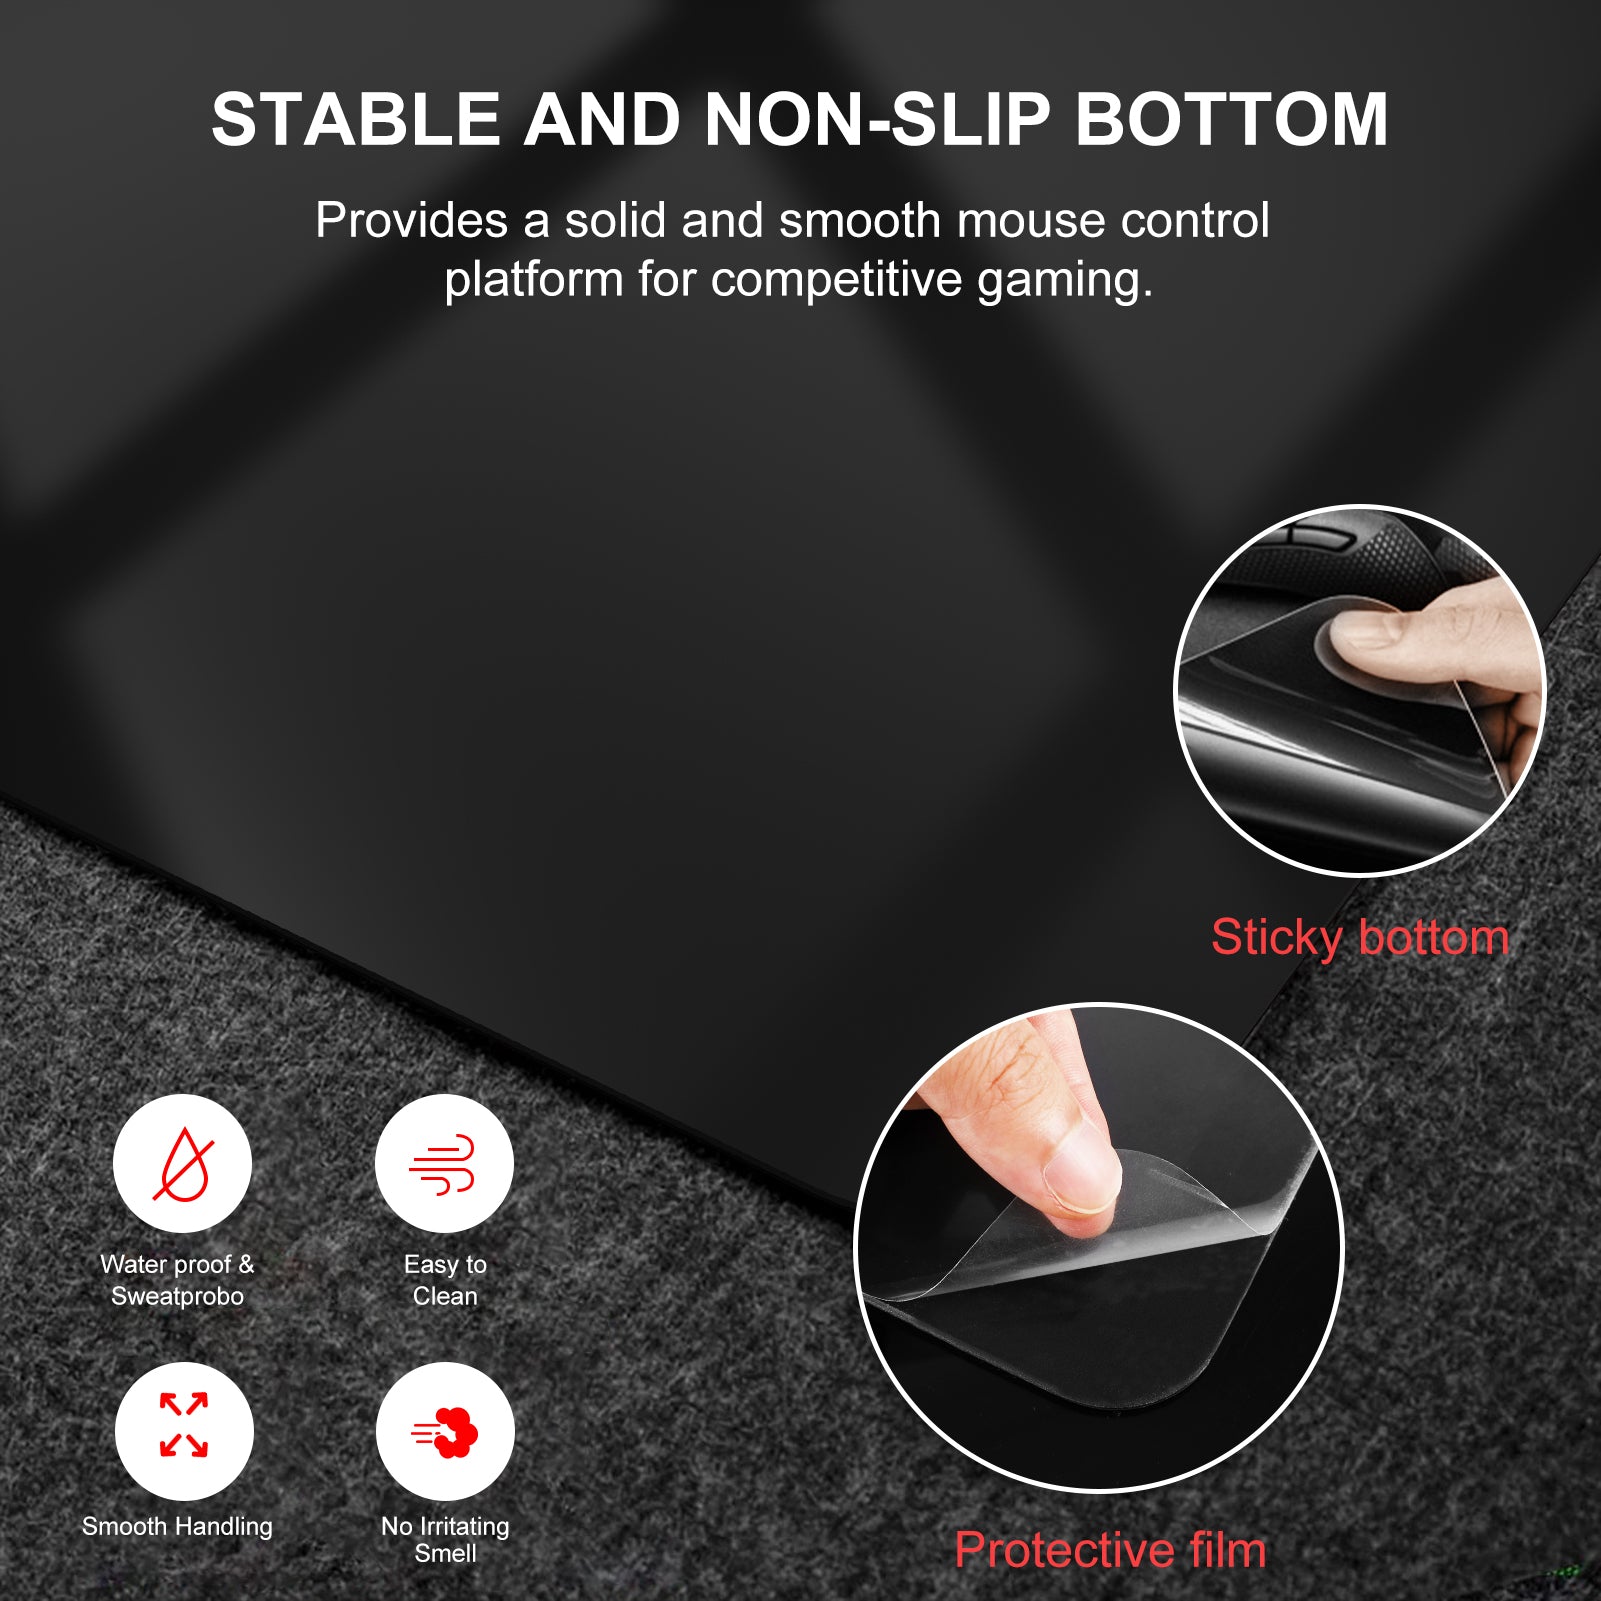 NPET SPEEDM Gaming Mousepad - Resin Surface Hard Gaming Mouse pad,Balanced Control & Speed, No Smell Waterproof Mouse Mat for Esports Gamers [Hard/Fast] Blue, Large